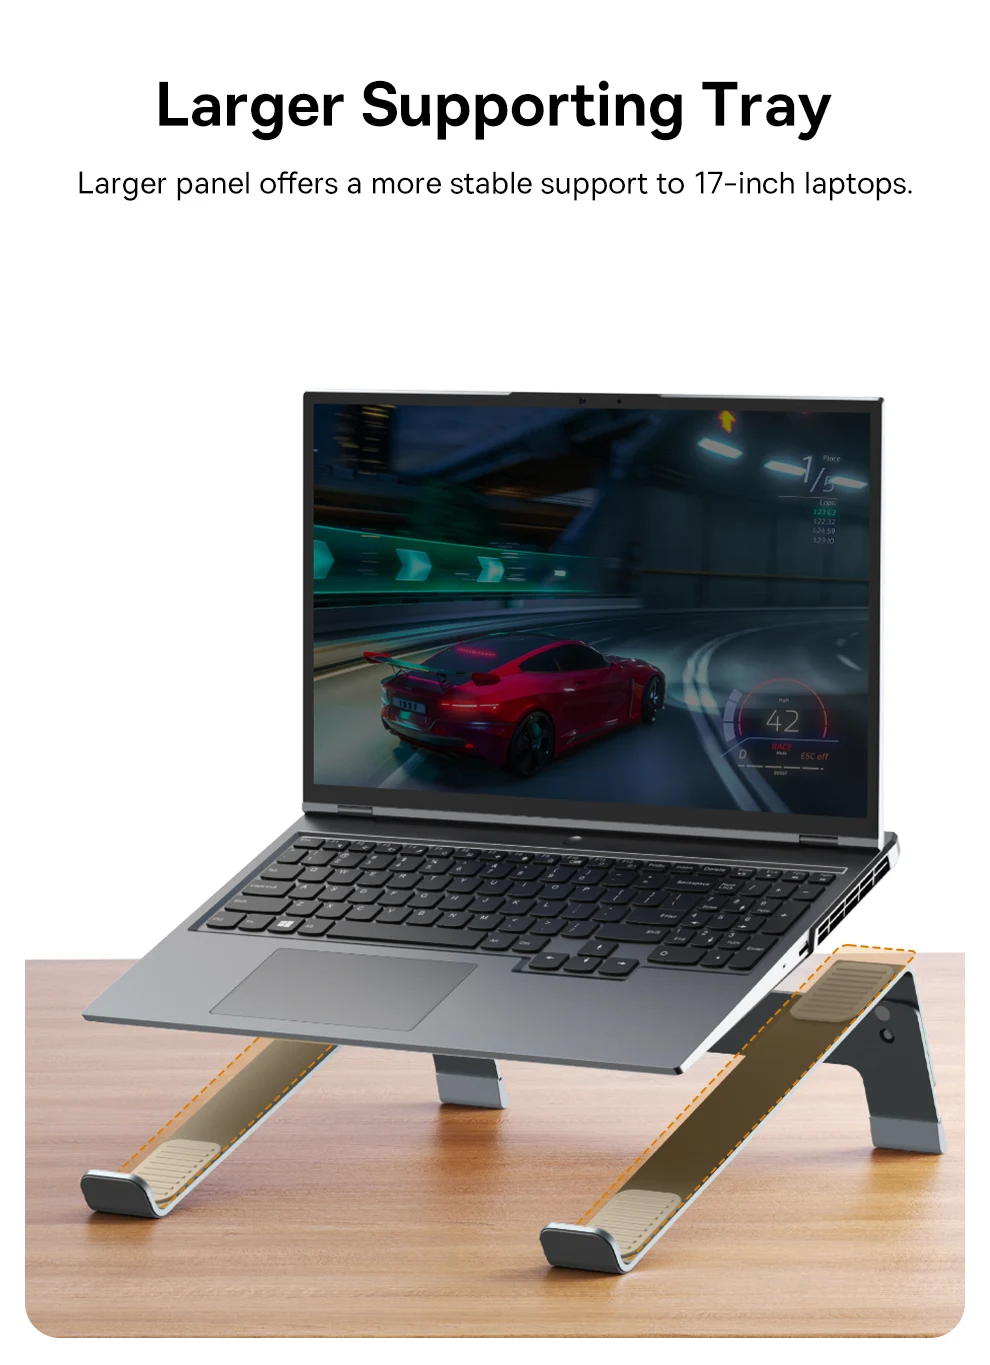 Buy Baseus UltraStable Series Laptop Stand 4-Gear Adjustable Price In Pakistan available on techmac.pk we offer fast home delivery all over nationwide.